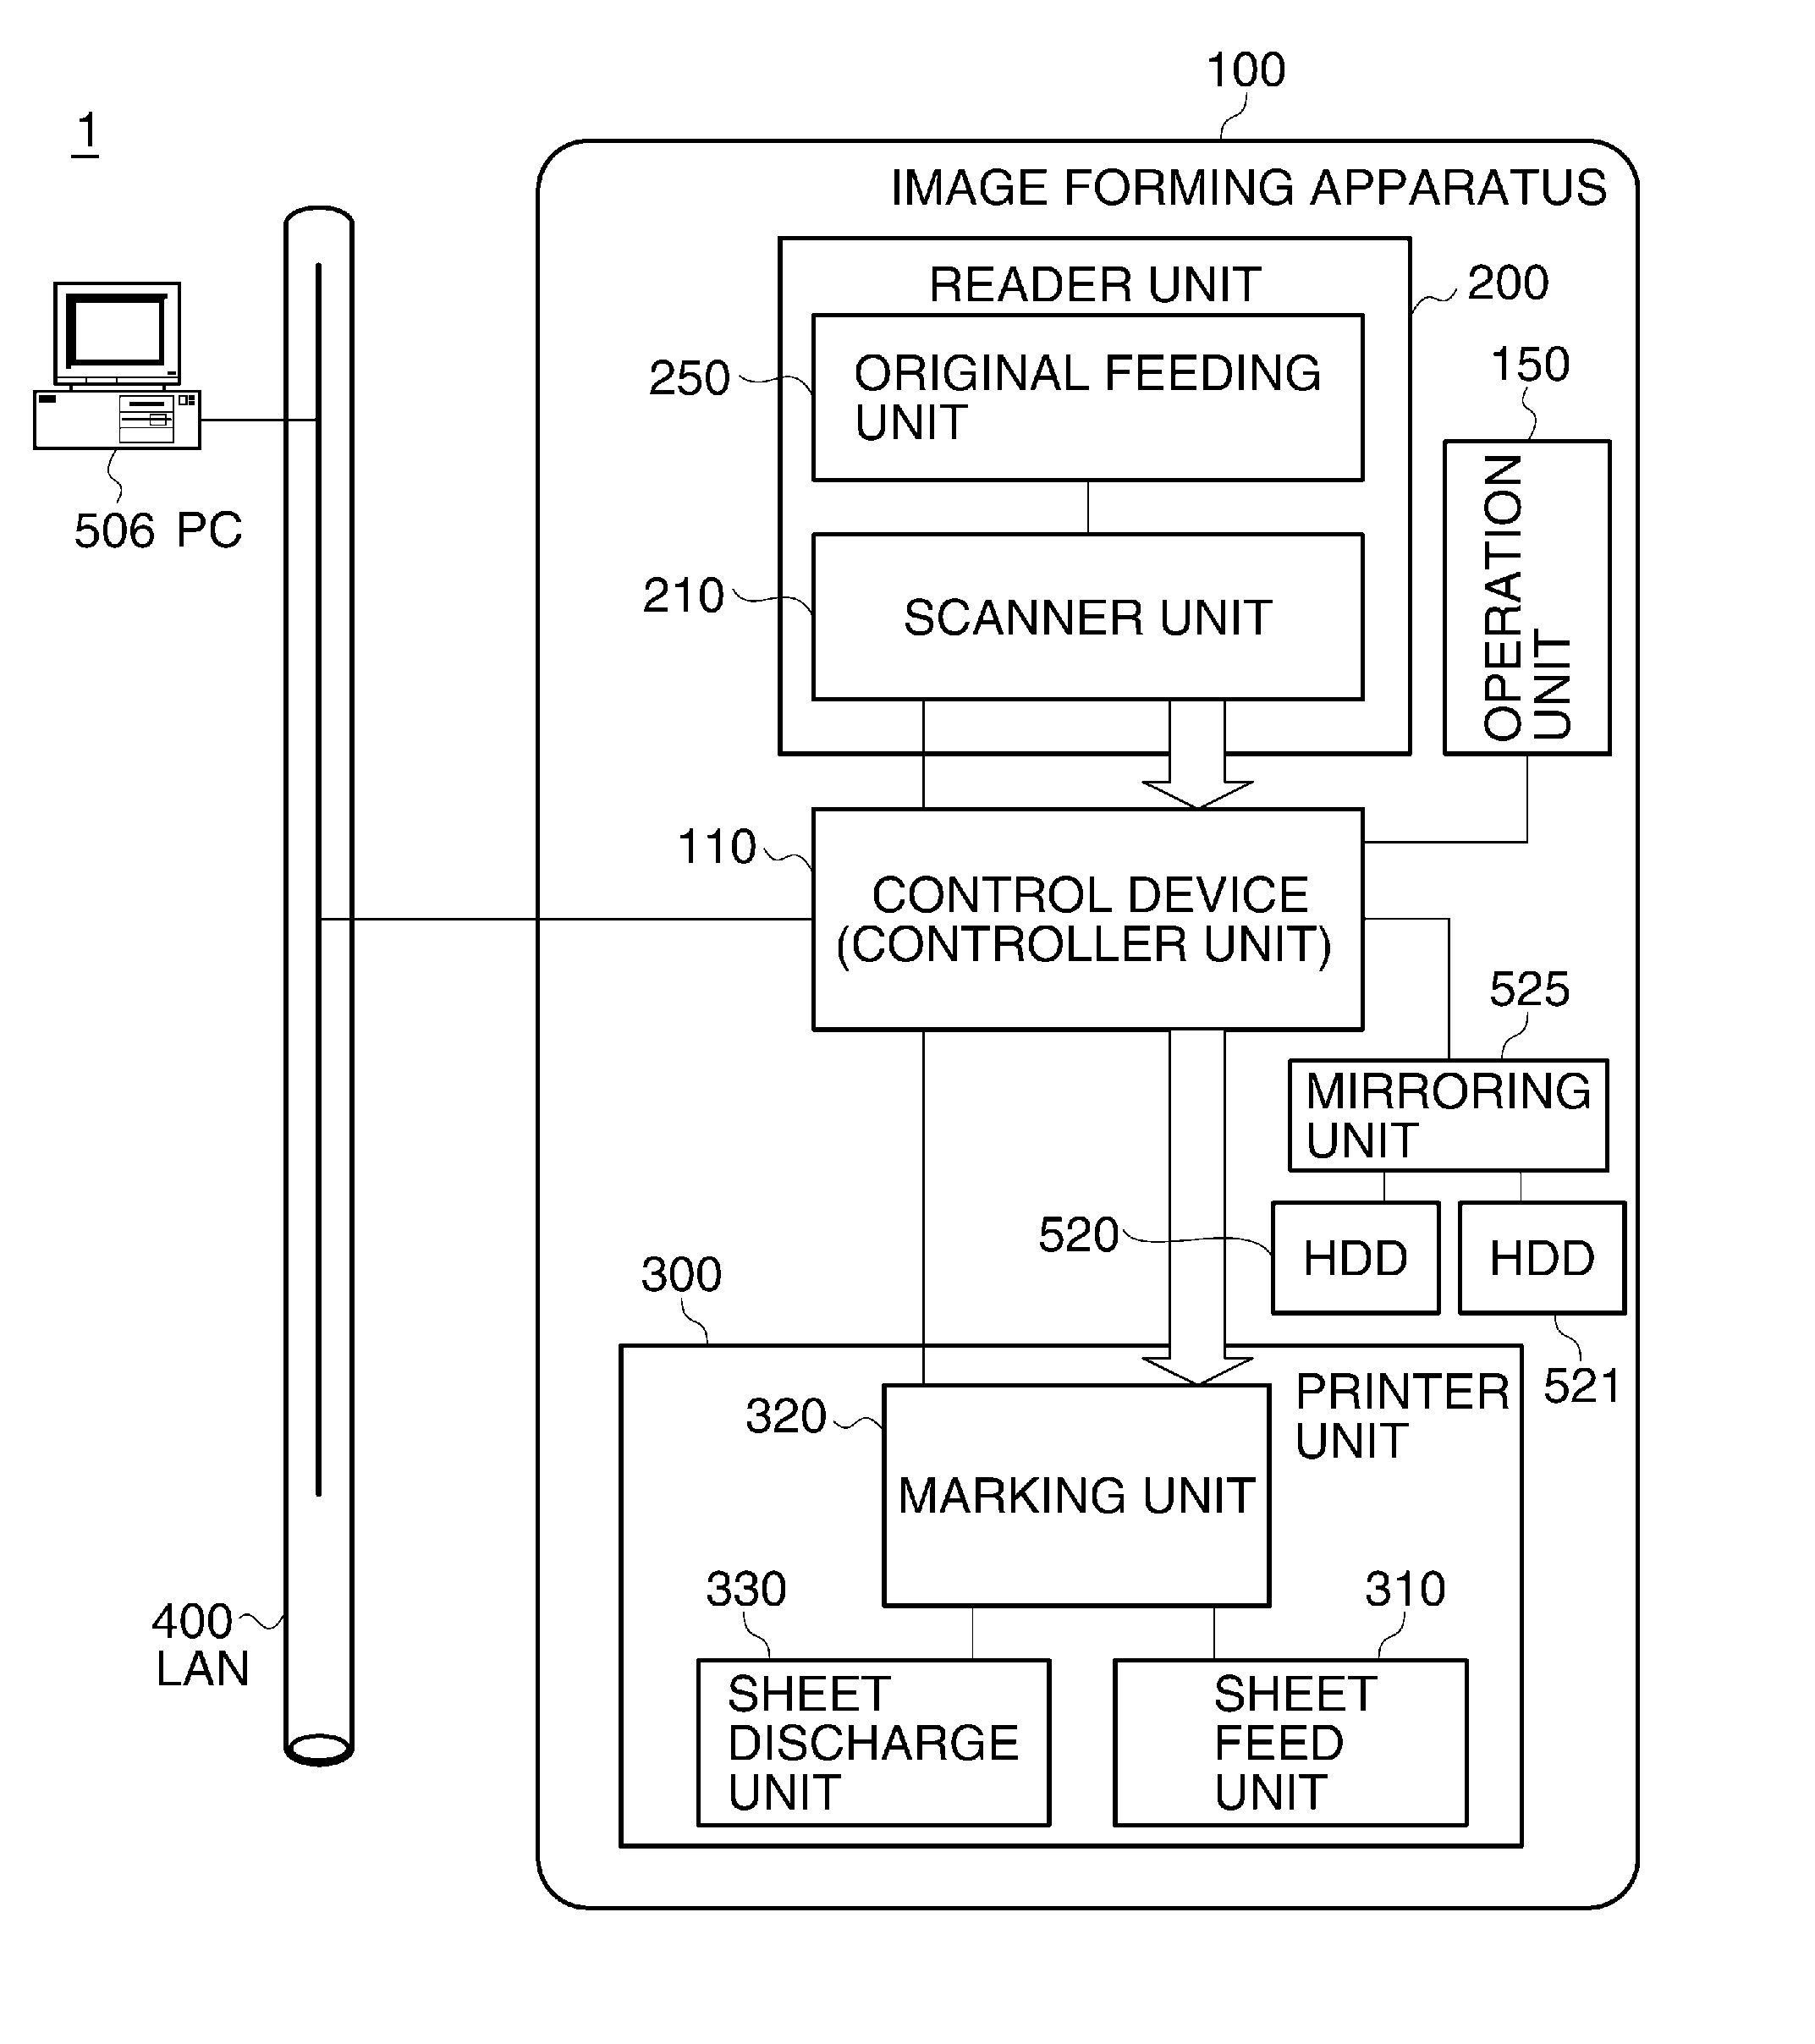 Information processing apparatus capable of appropriately providing notification of storage unit failure prediction, control method therefor, and storage medium